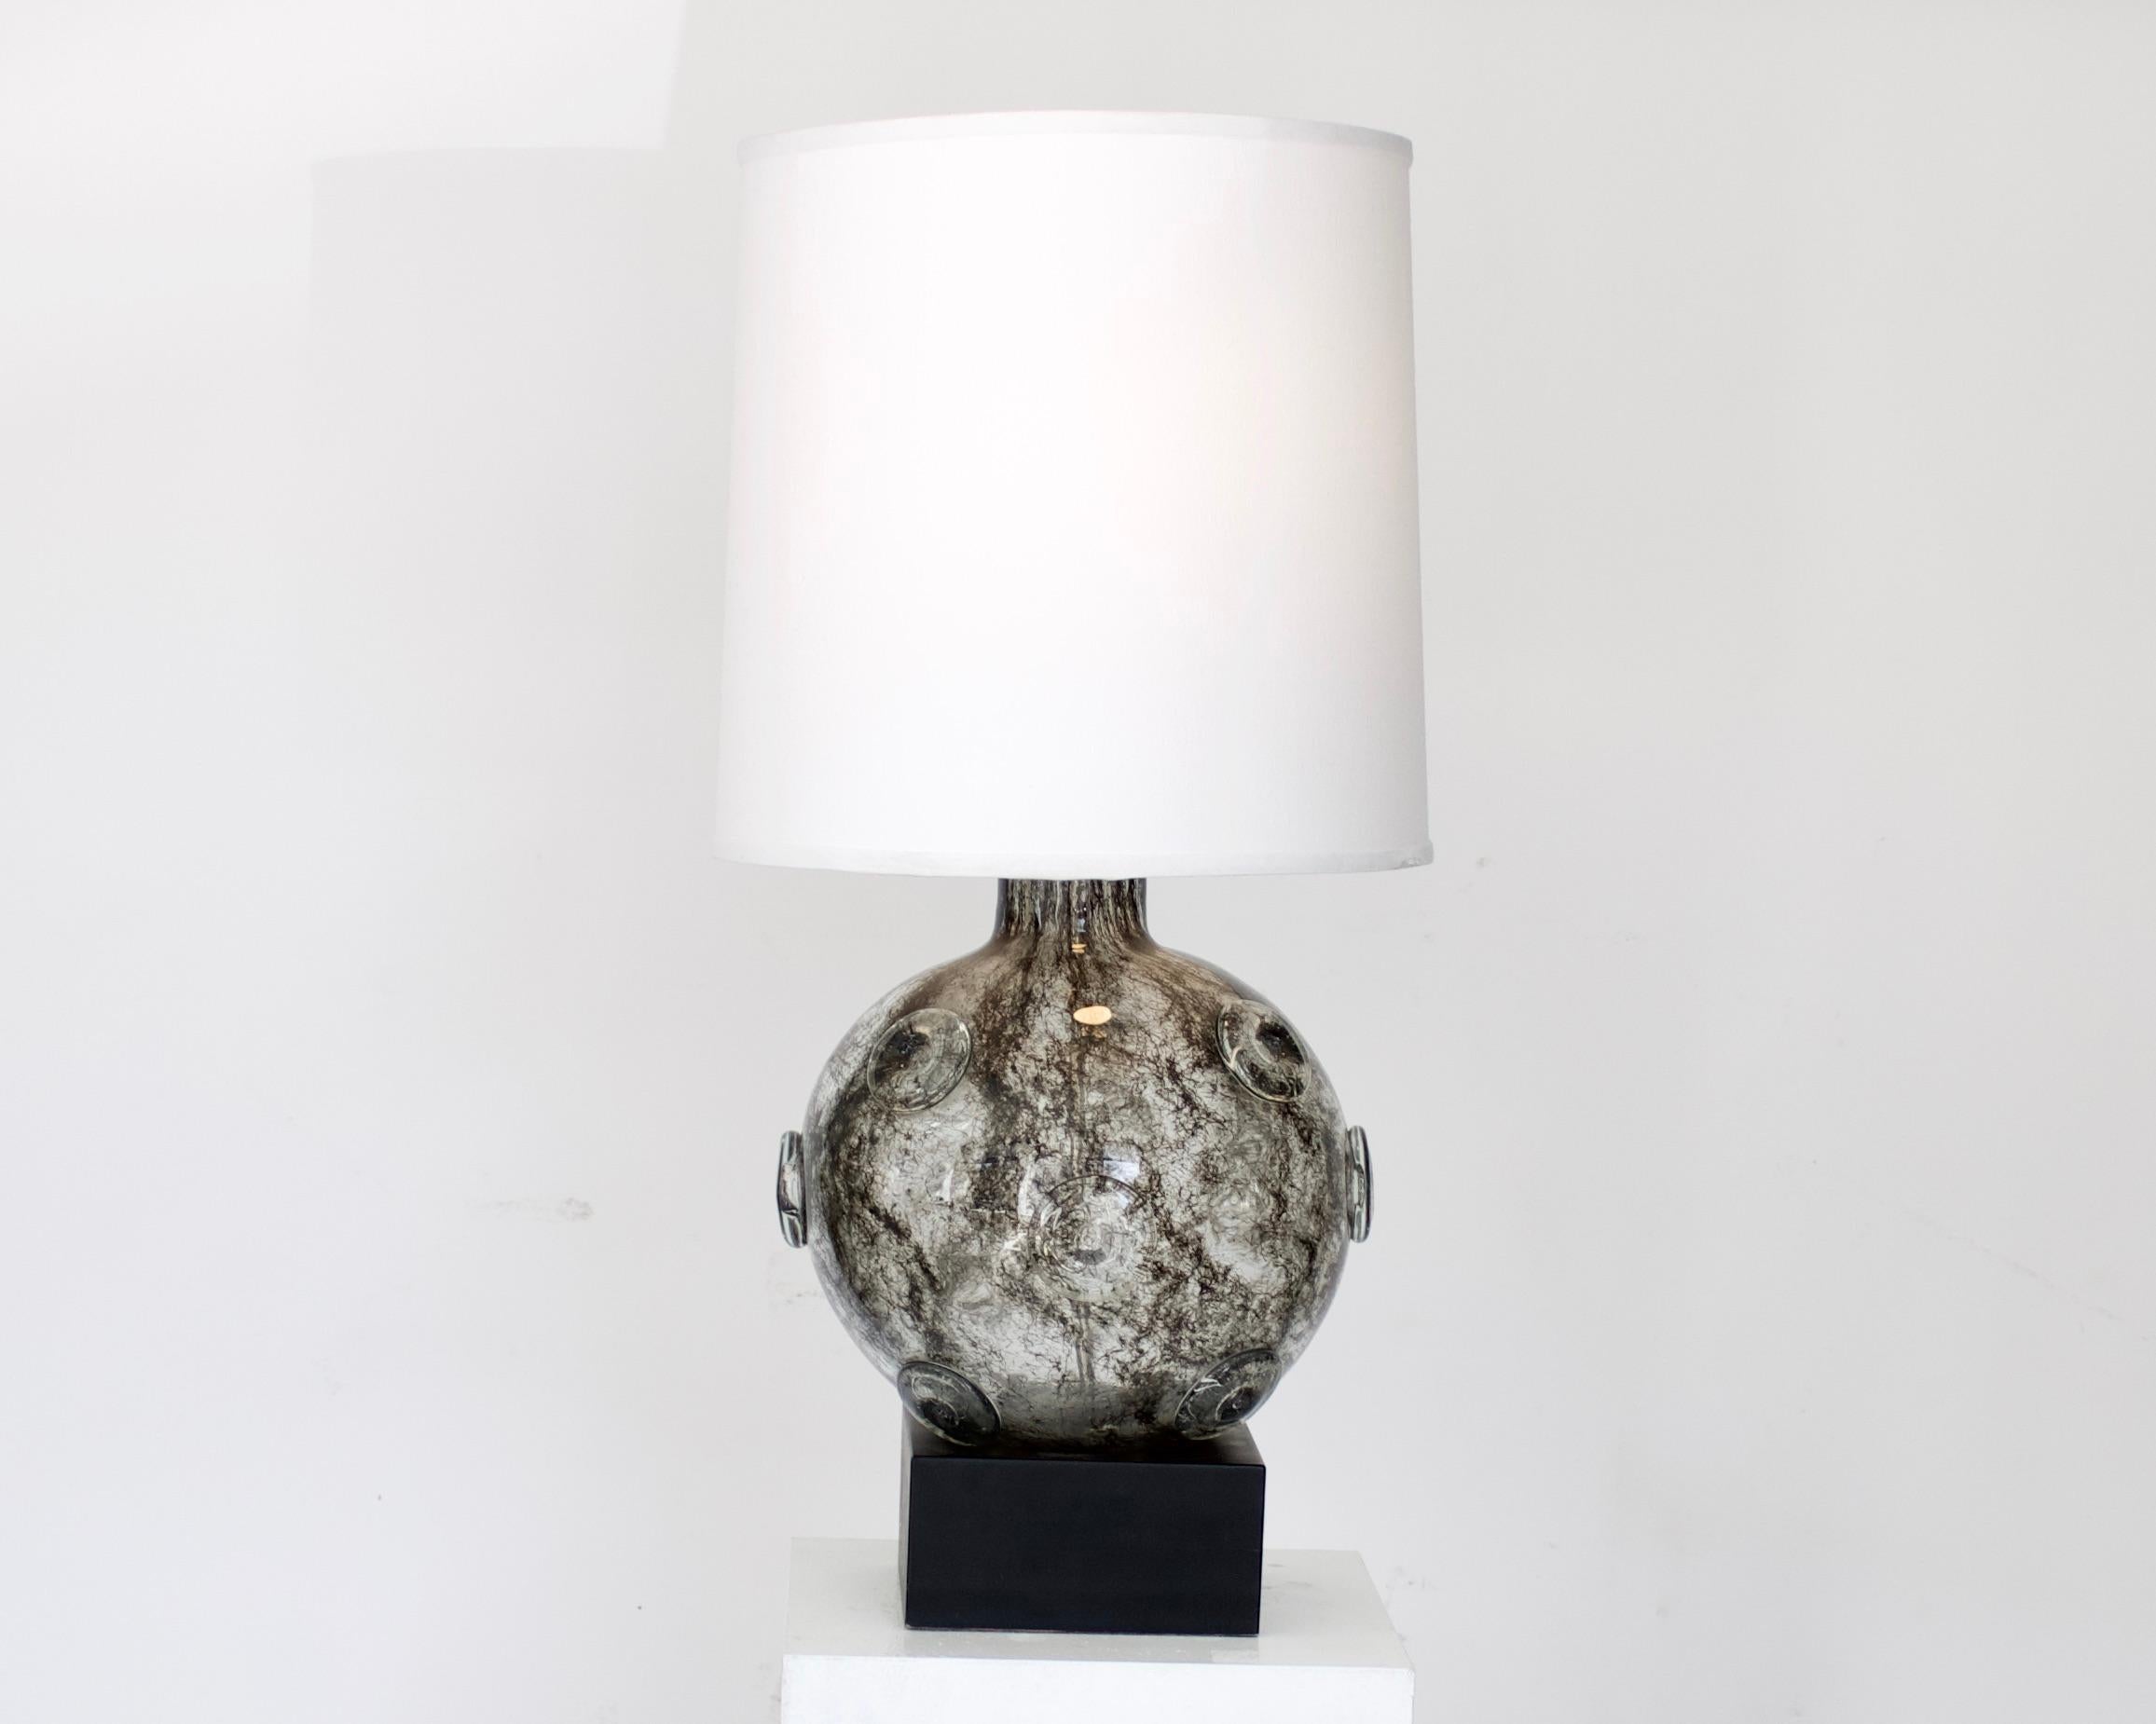 Ercole Barovier Crepuscolo Italian Murano table lamp, circa 1930-1935.
Ferro Toso Barovier Italy, 1935-1936 internally decorated glass with applied disks.
The high quality Art Deco table lamp is made of internally decorated glass with burned iron